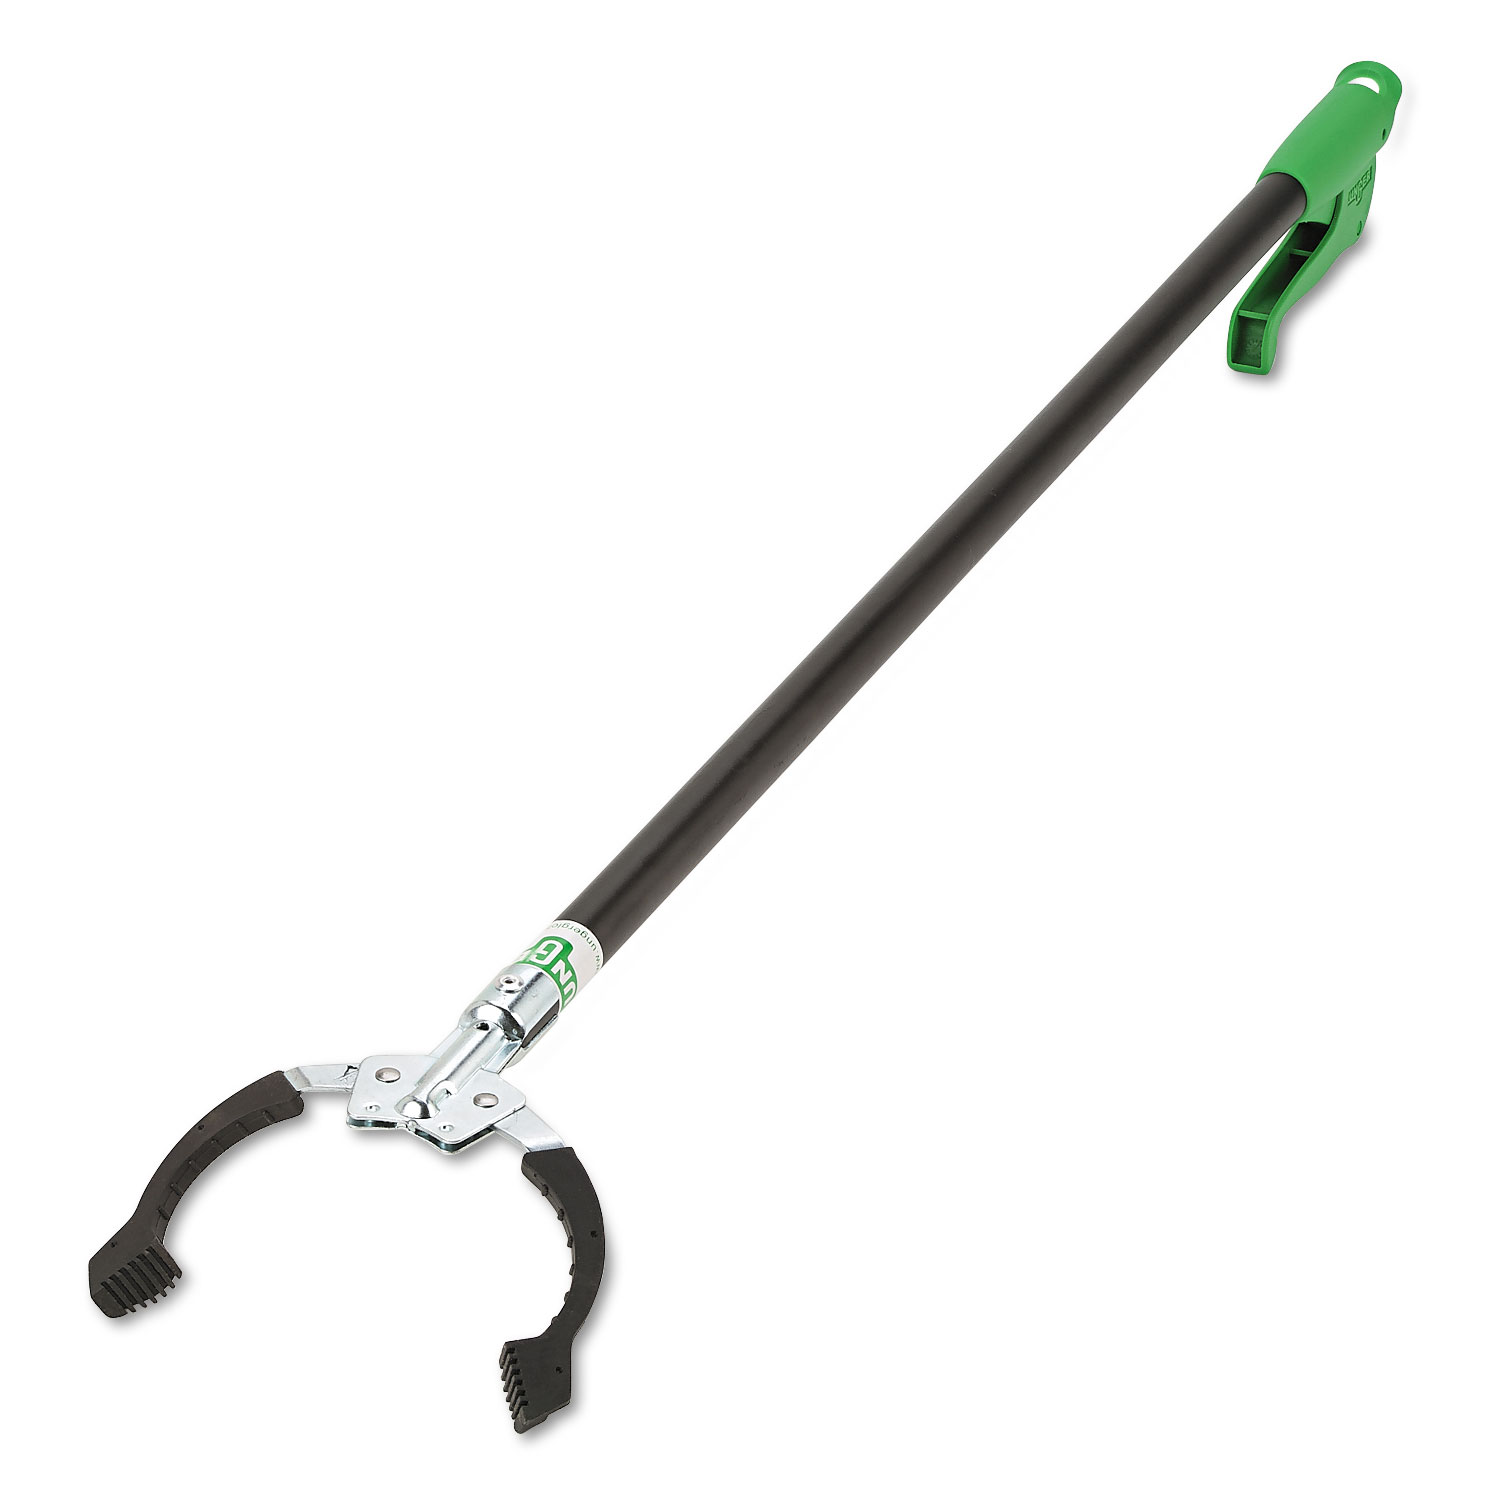 Nifty Nabber Extension Arm w/Claw, 36", Black/Green